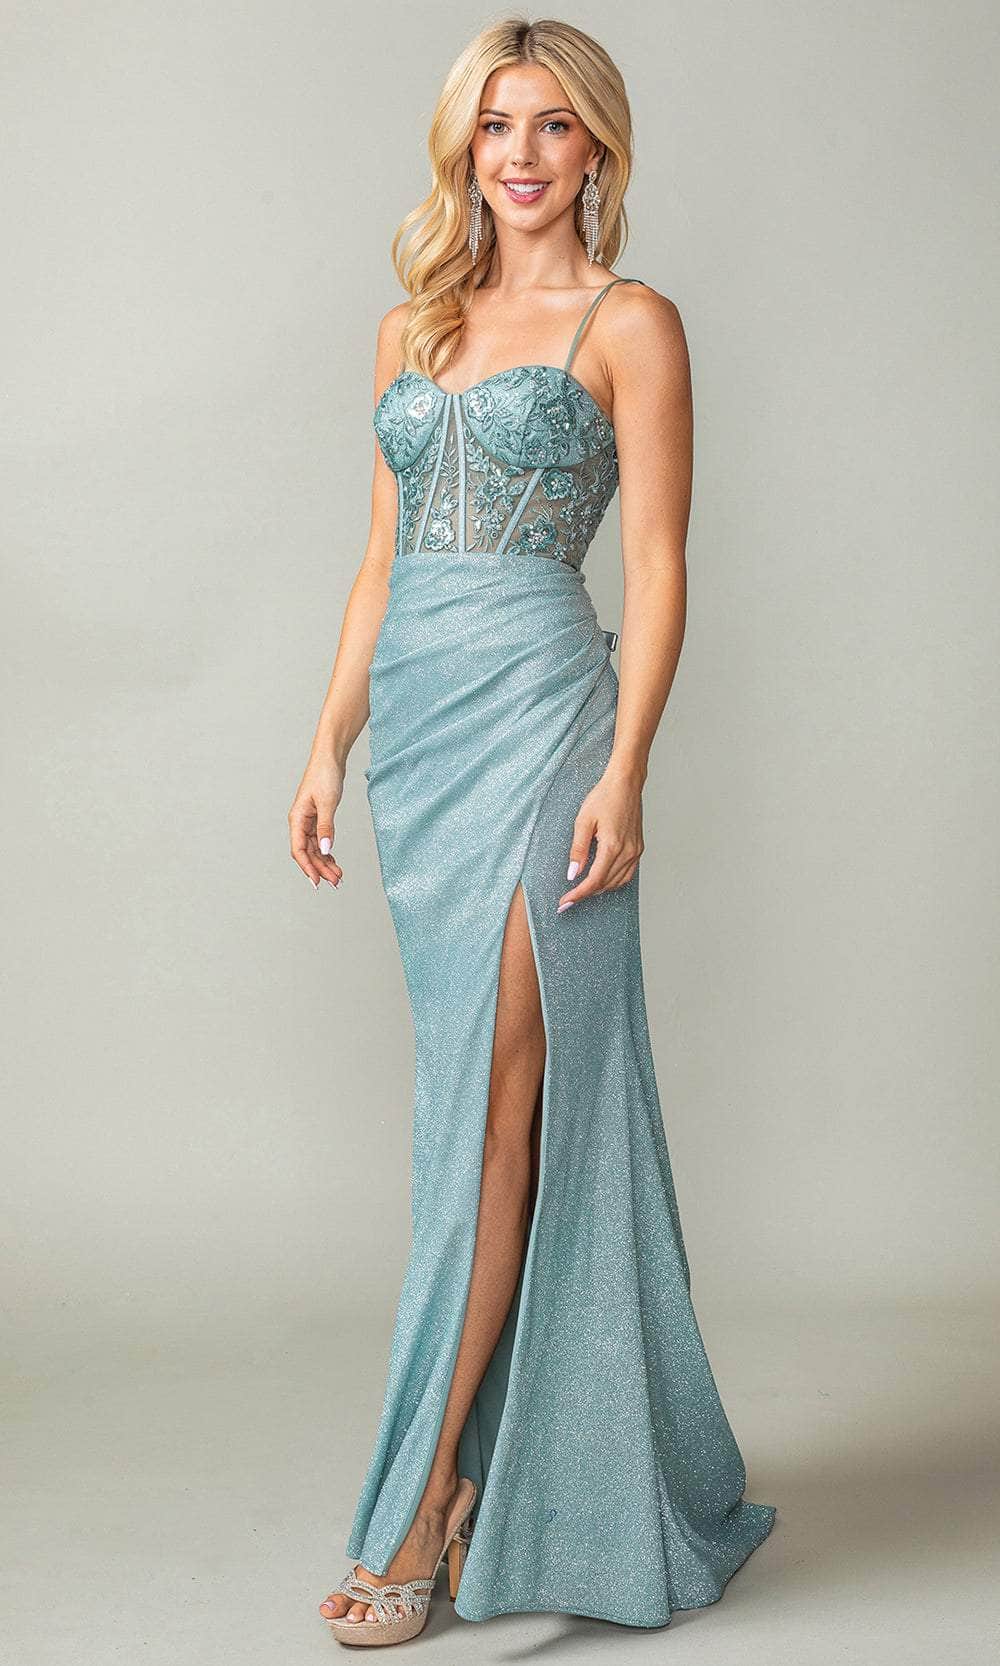 Dancing Queen 4369 - Sweetheart Sleeveless Prom Gown Prom Dresses 